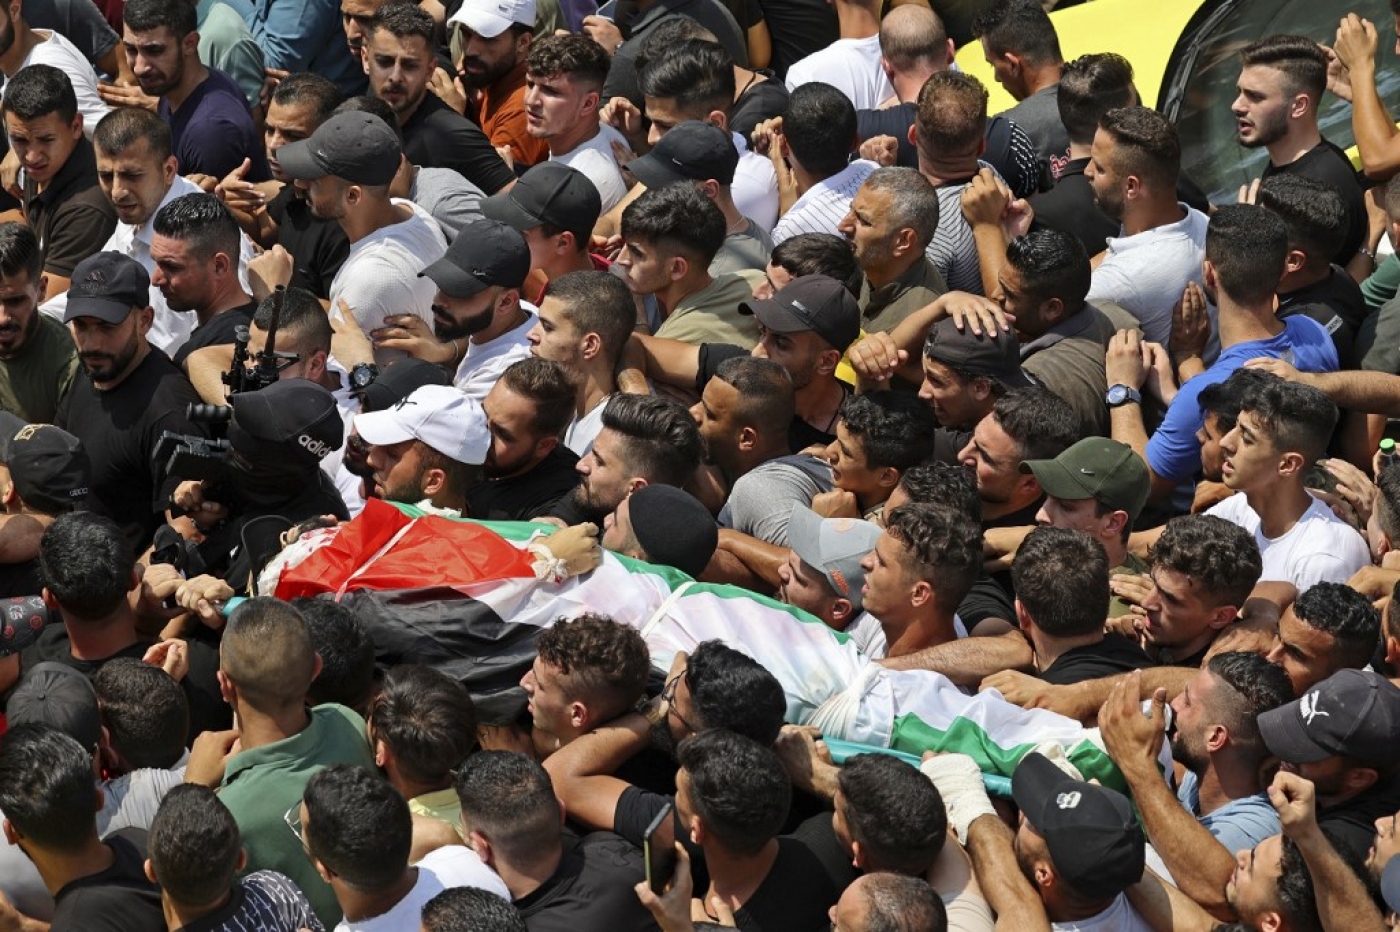 Mourners carry the body of Ibrahim al-Nabulsi, who was killed in an Israeli raid, during a funeral procession in the West Bank city of Nablus on 9 August 2022 (AFP)